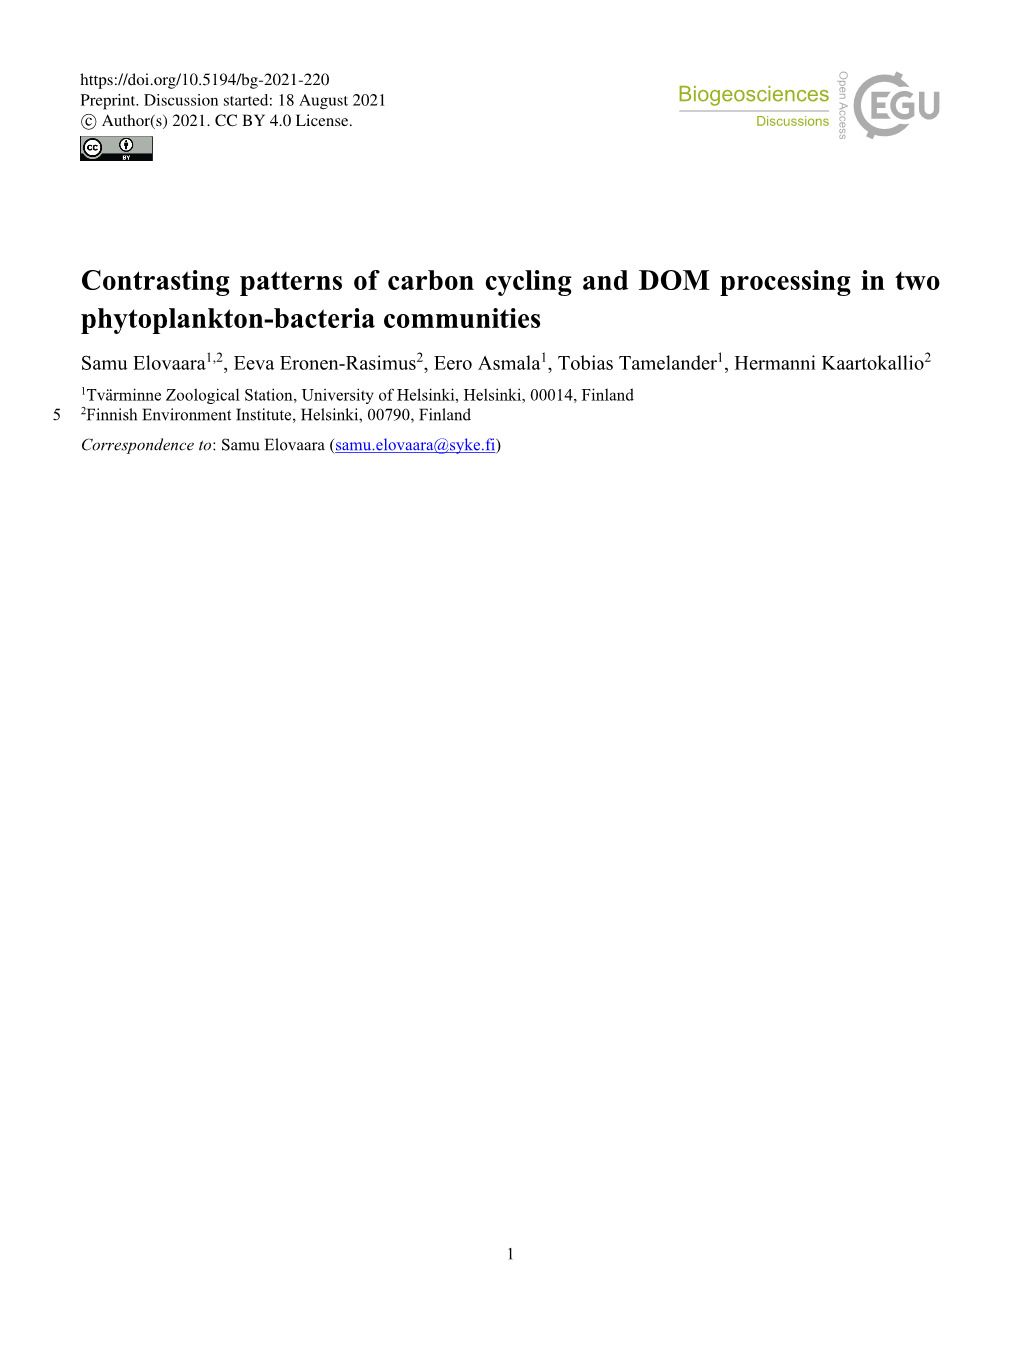 Contrasting Patterns of Carbon Cycling and DOM Processing in Two